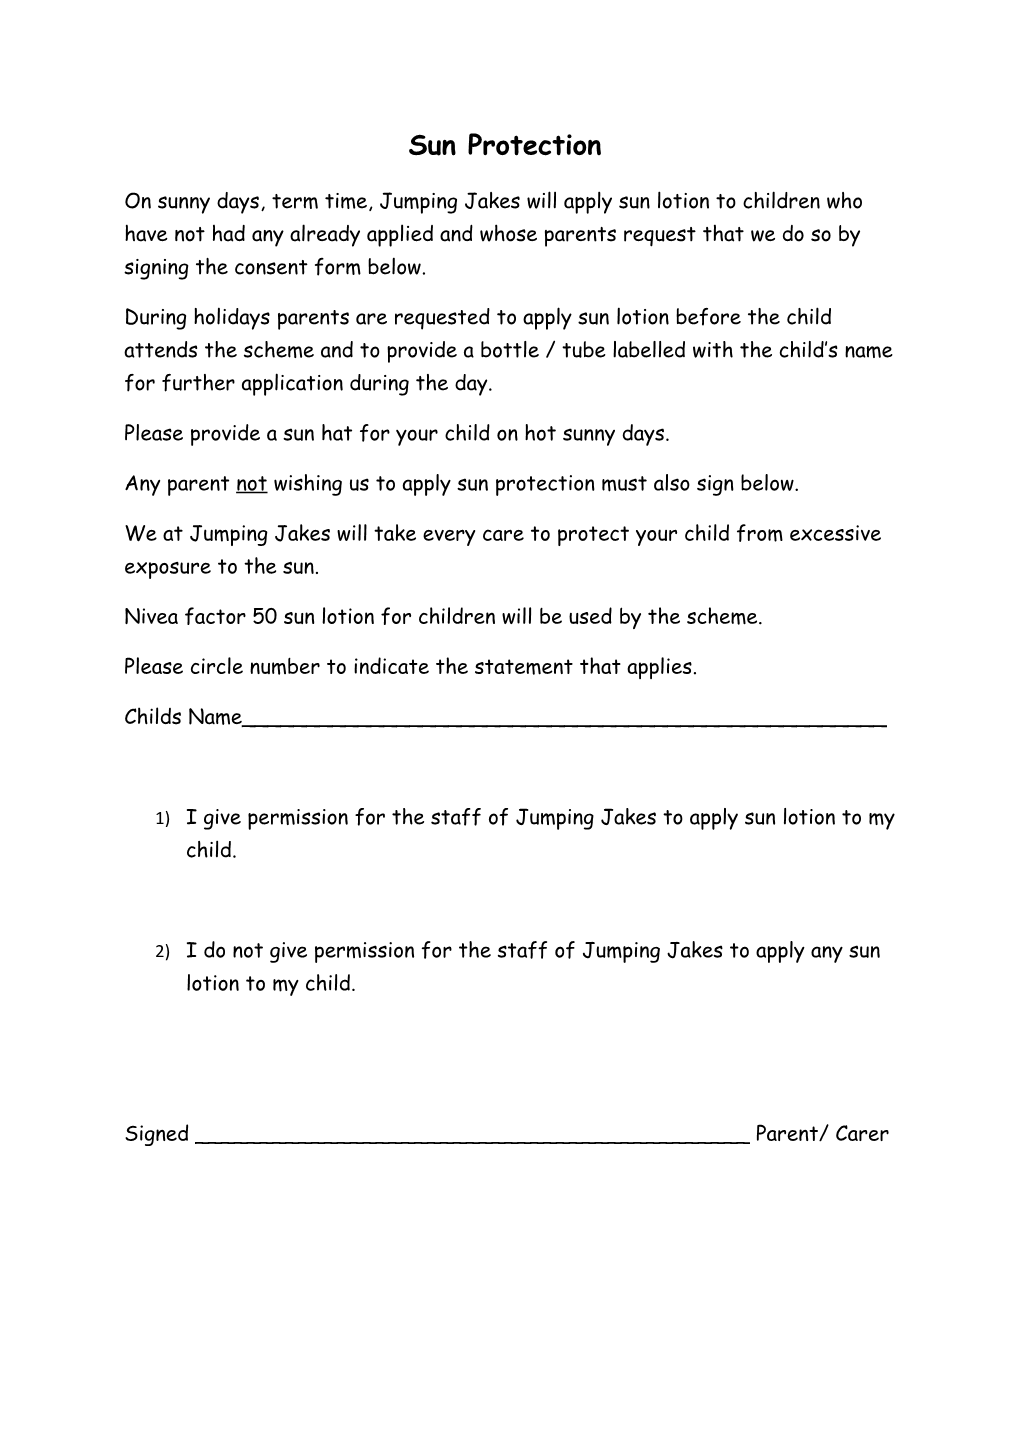 These Consent Forms Will Remain Valid Whilst the Child Is Registered with Jumping Jakes